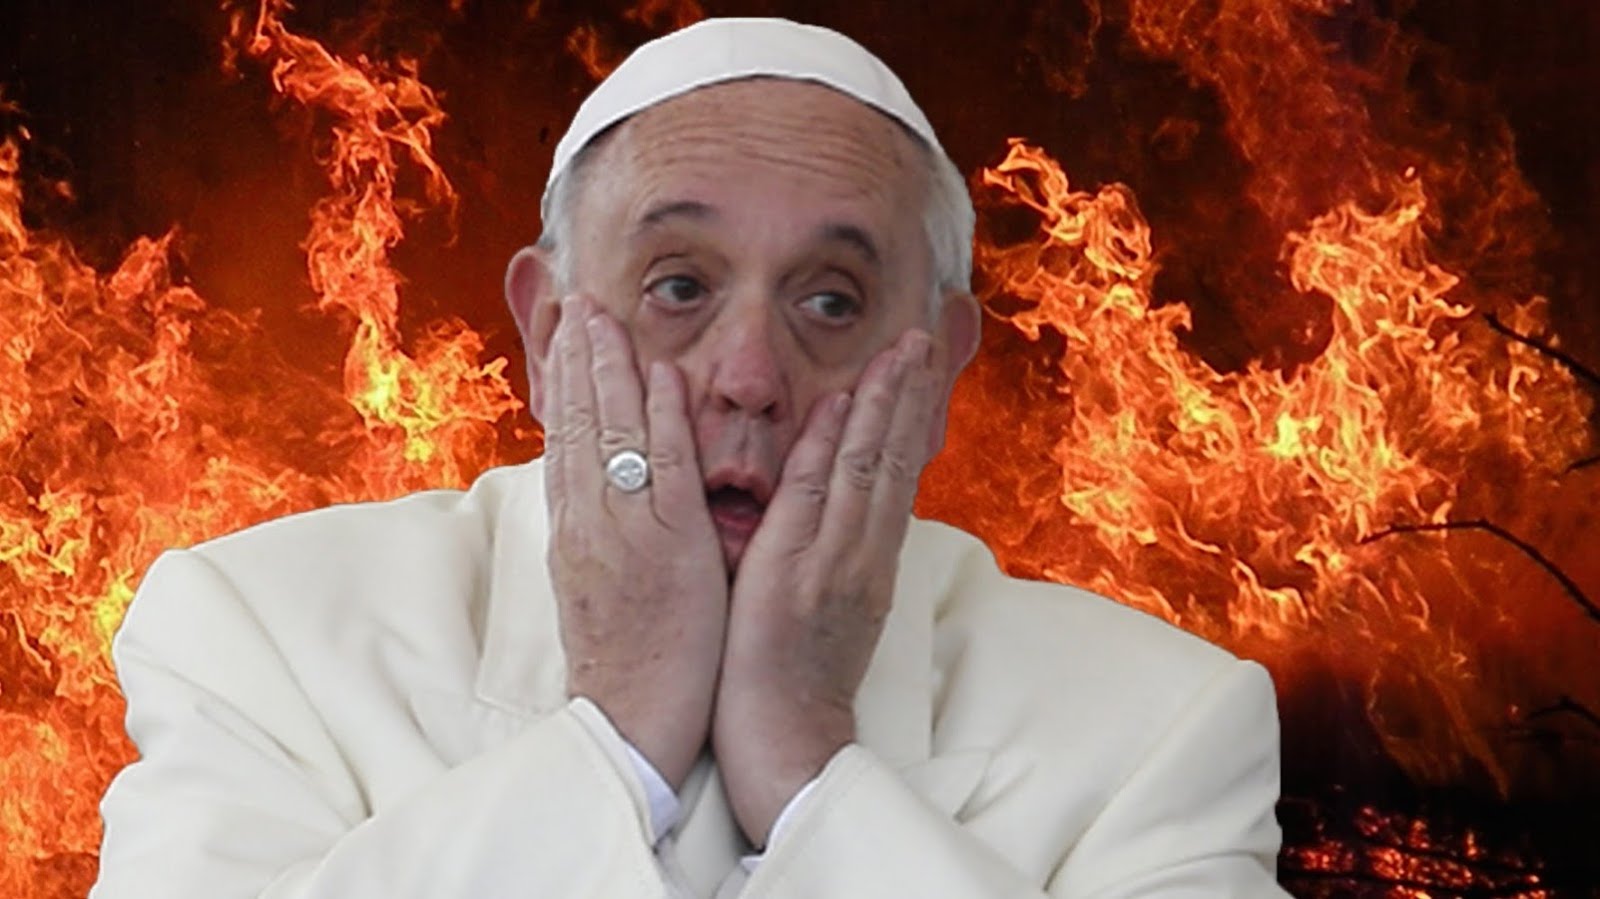 POPE FRANCIS - MADE A BIG MISTAKE AND SENT HIS OWN SOUL TO HELL AS WELL